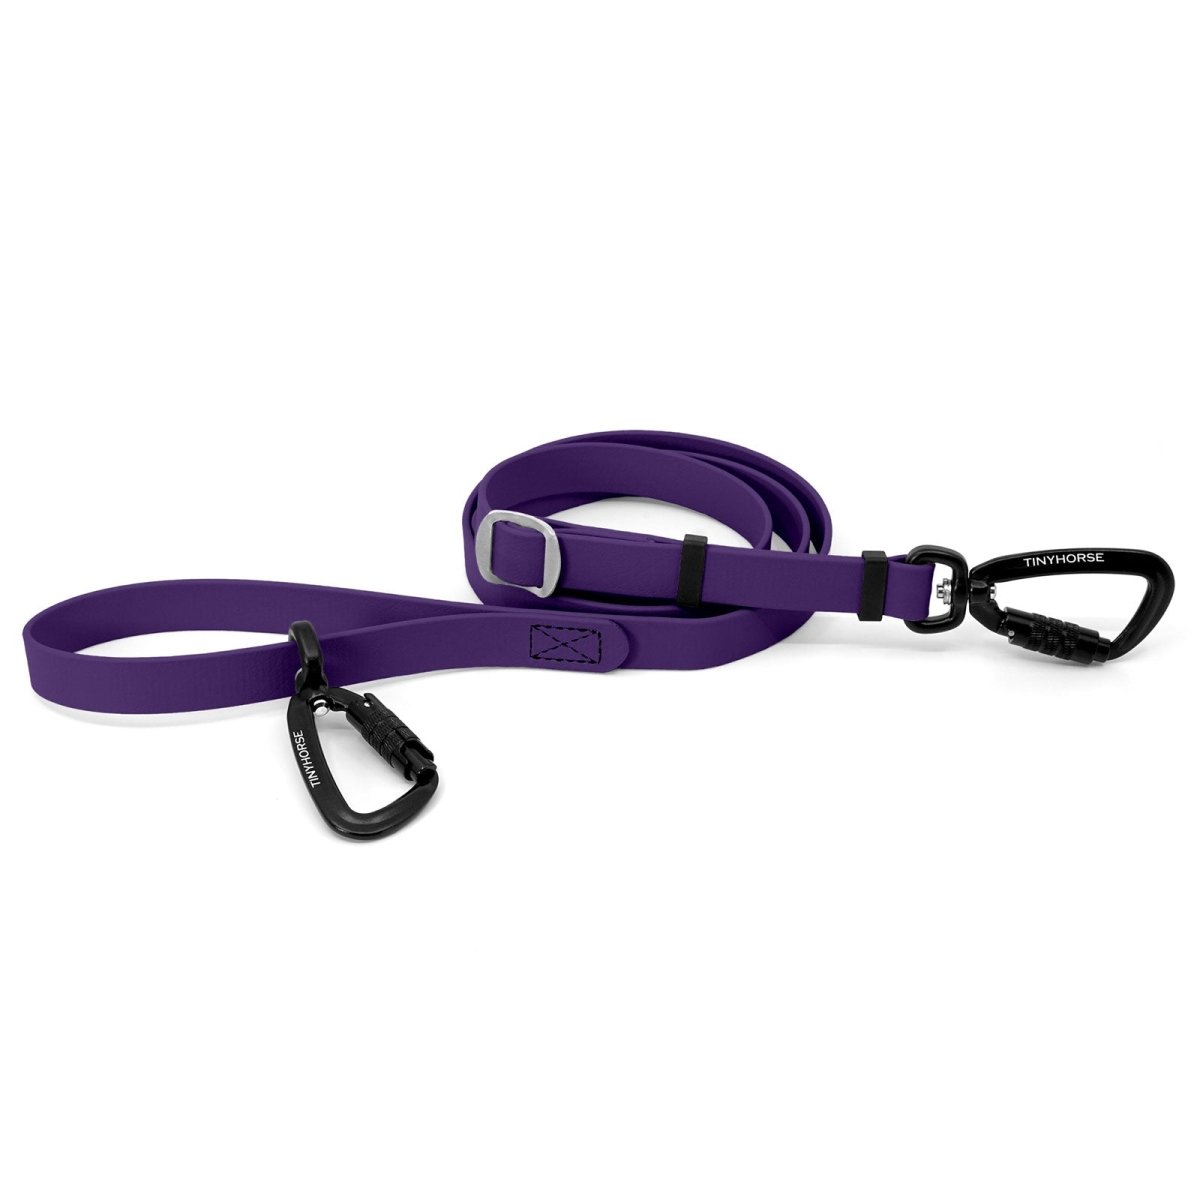 An adjustable dark purple-coloured Lead-All Pro Extra made of BioThane with 2 auto-locking carabiners